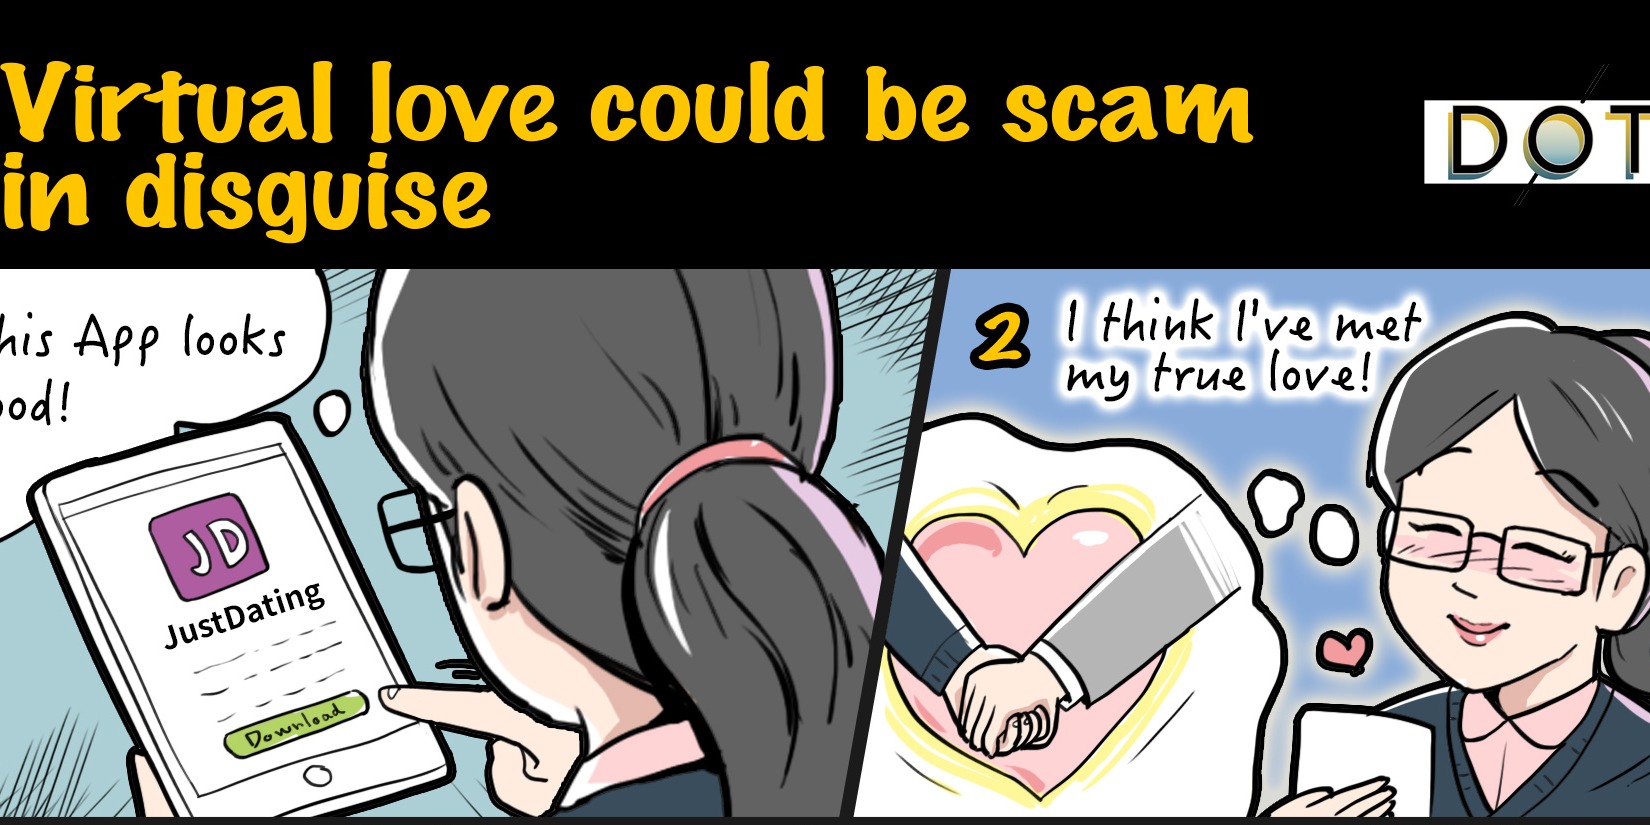 Exclusive Case | Virtual love could be scam in disguise